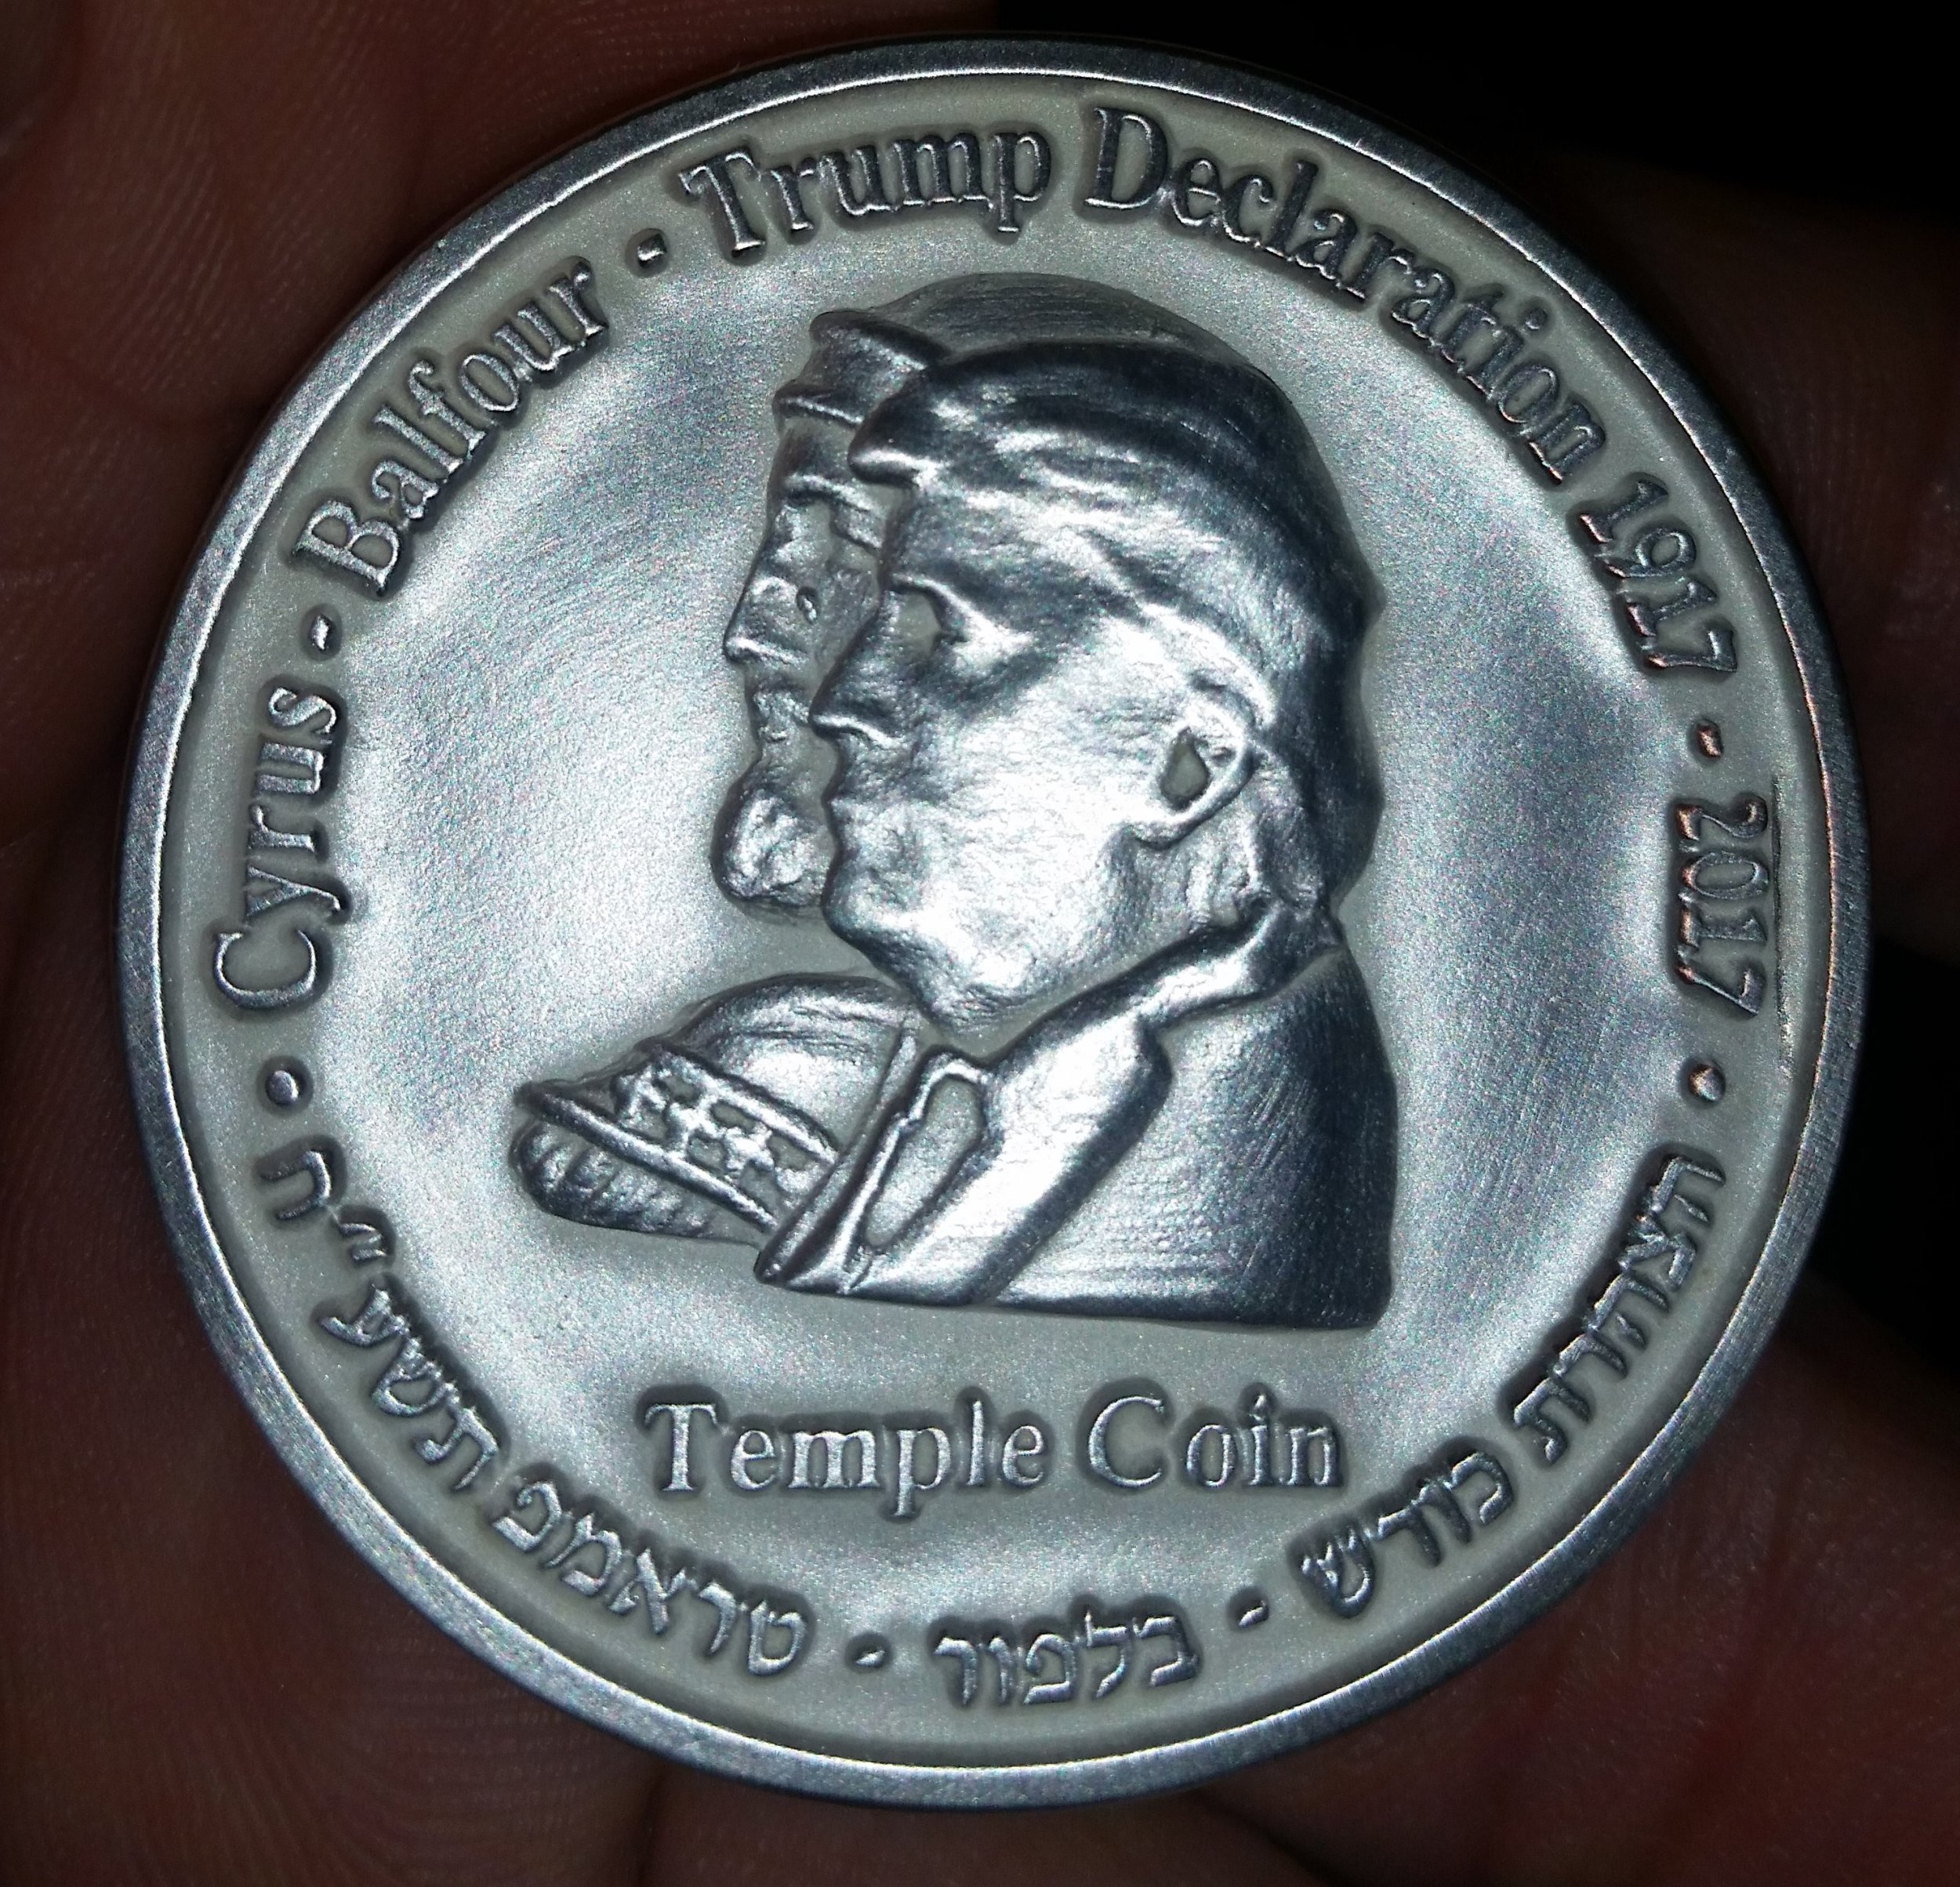 trumpcoin-front-side.jpg